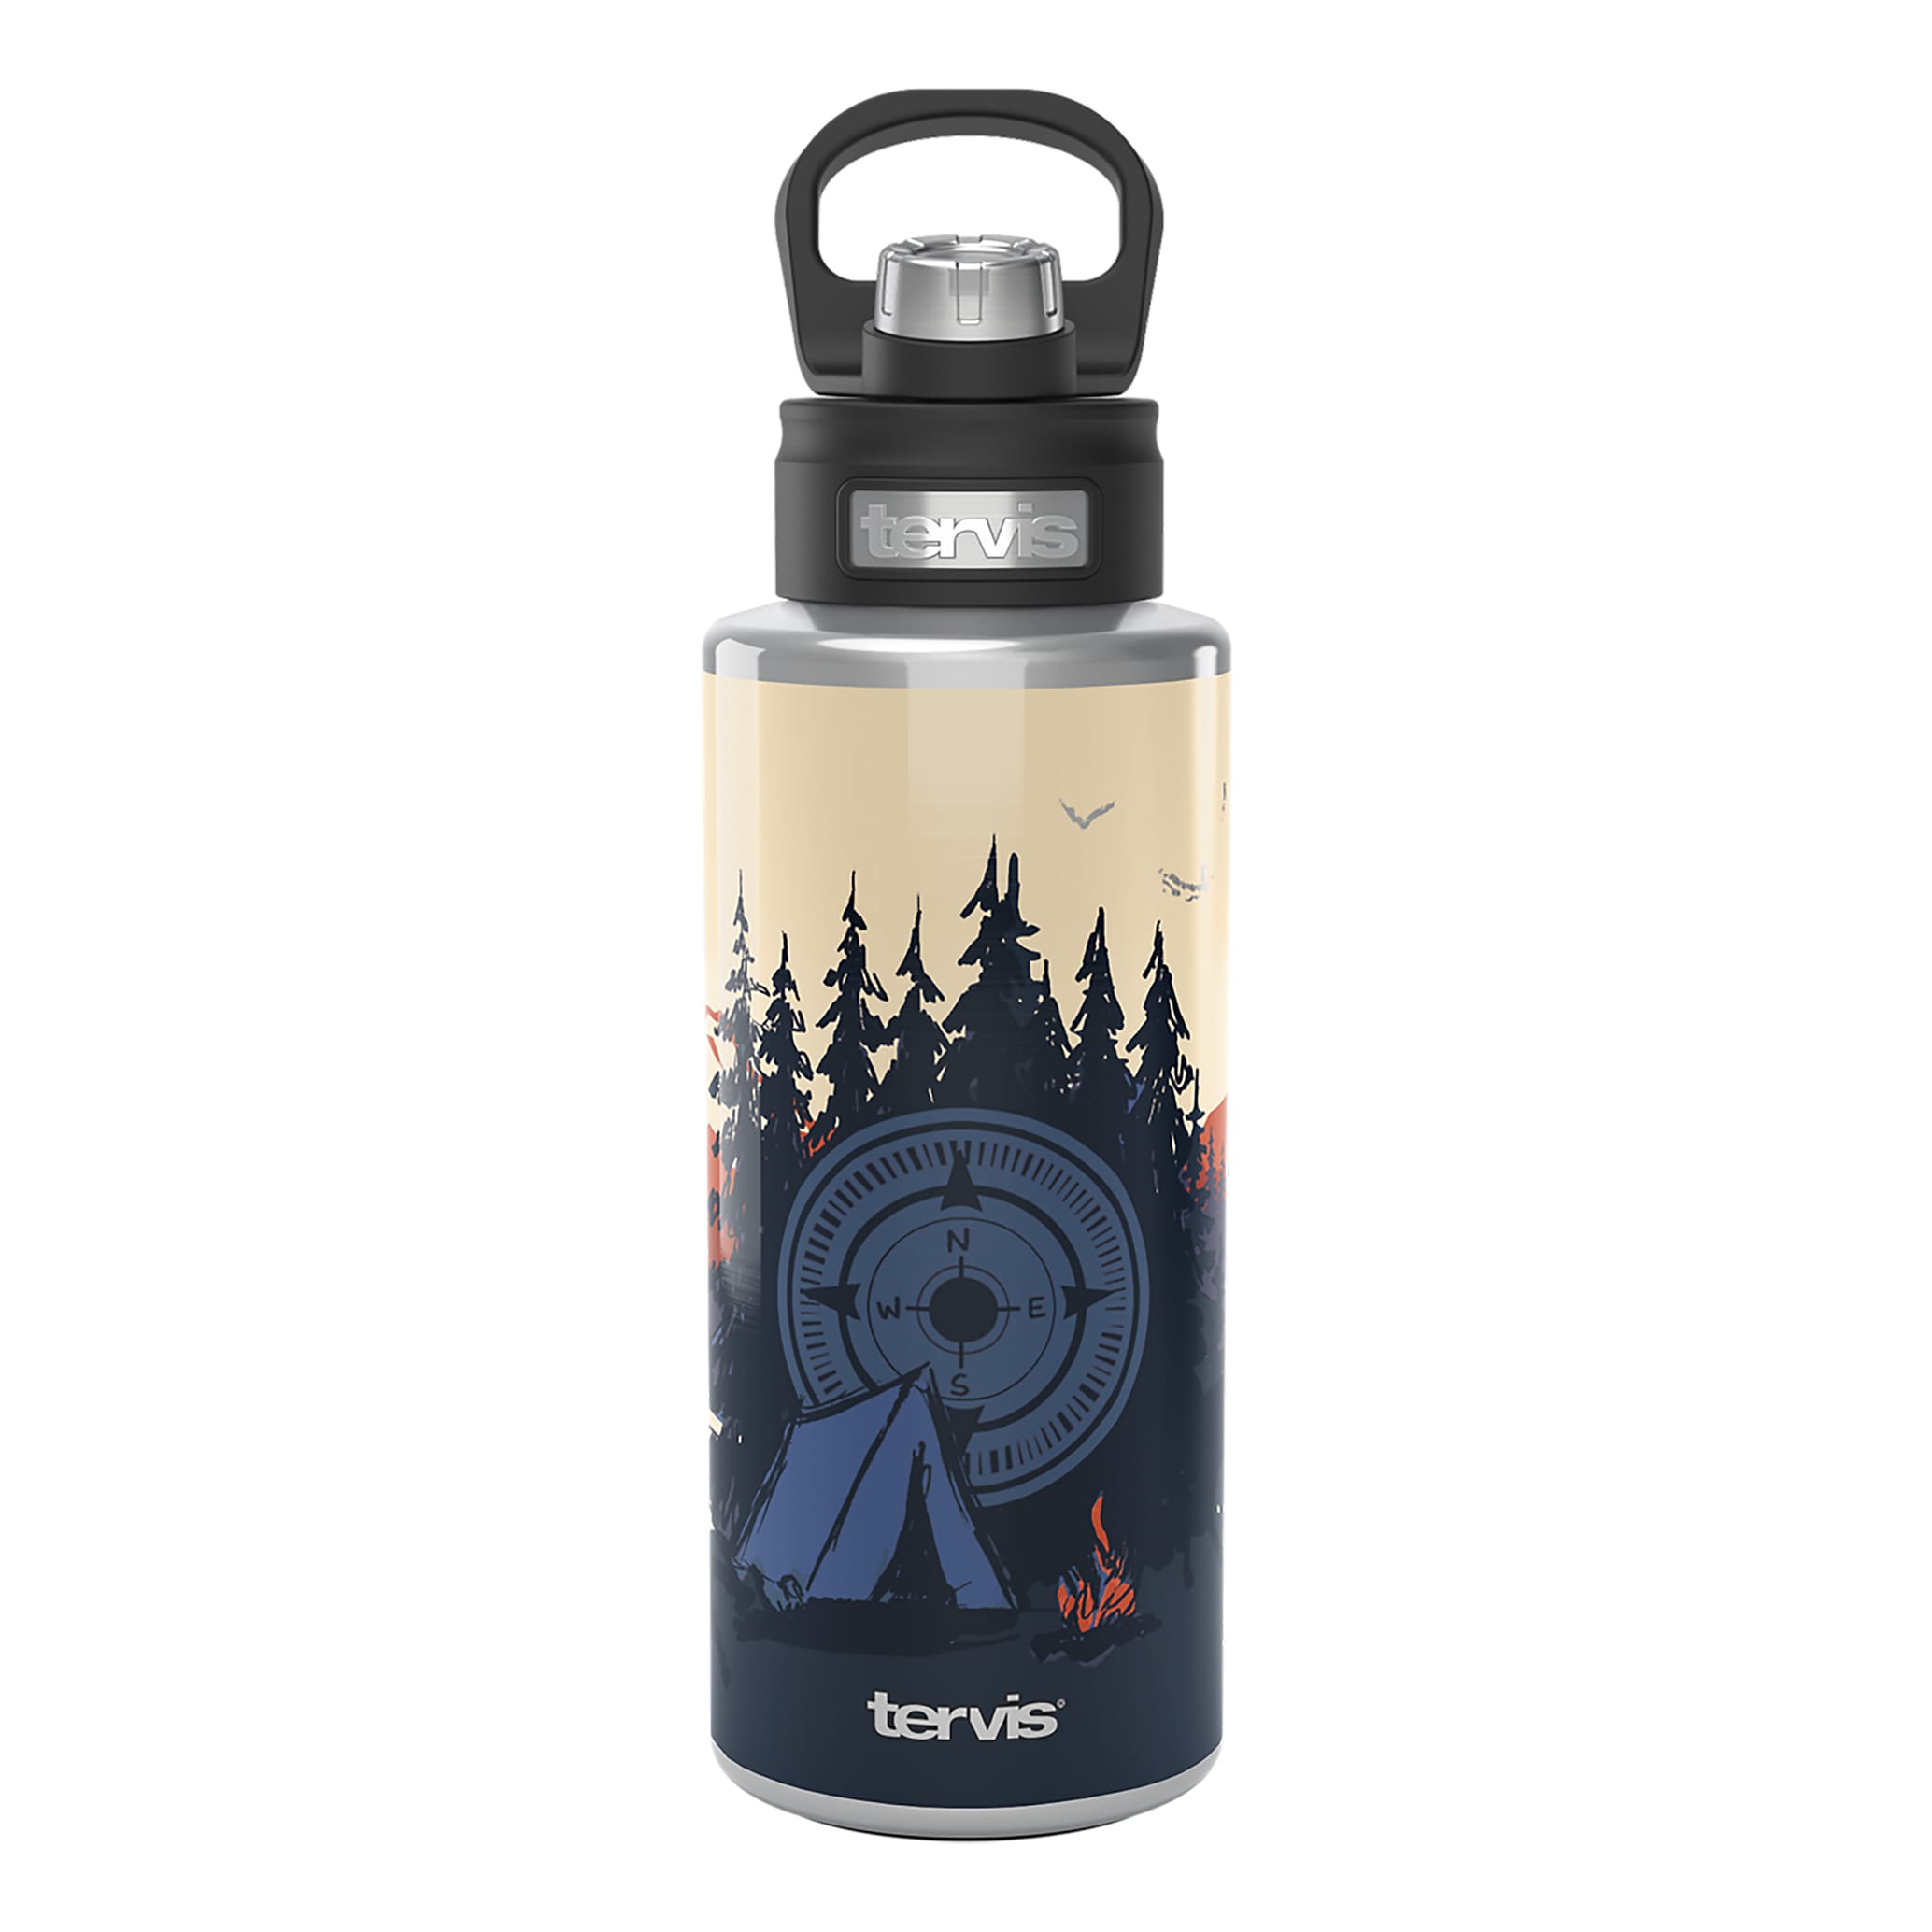 Tervis 32 oz. Wide Mouth Bottle - Wild Camp